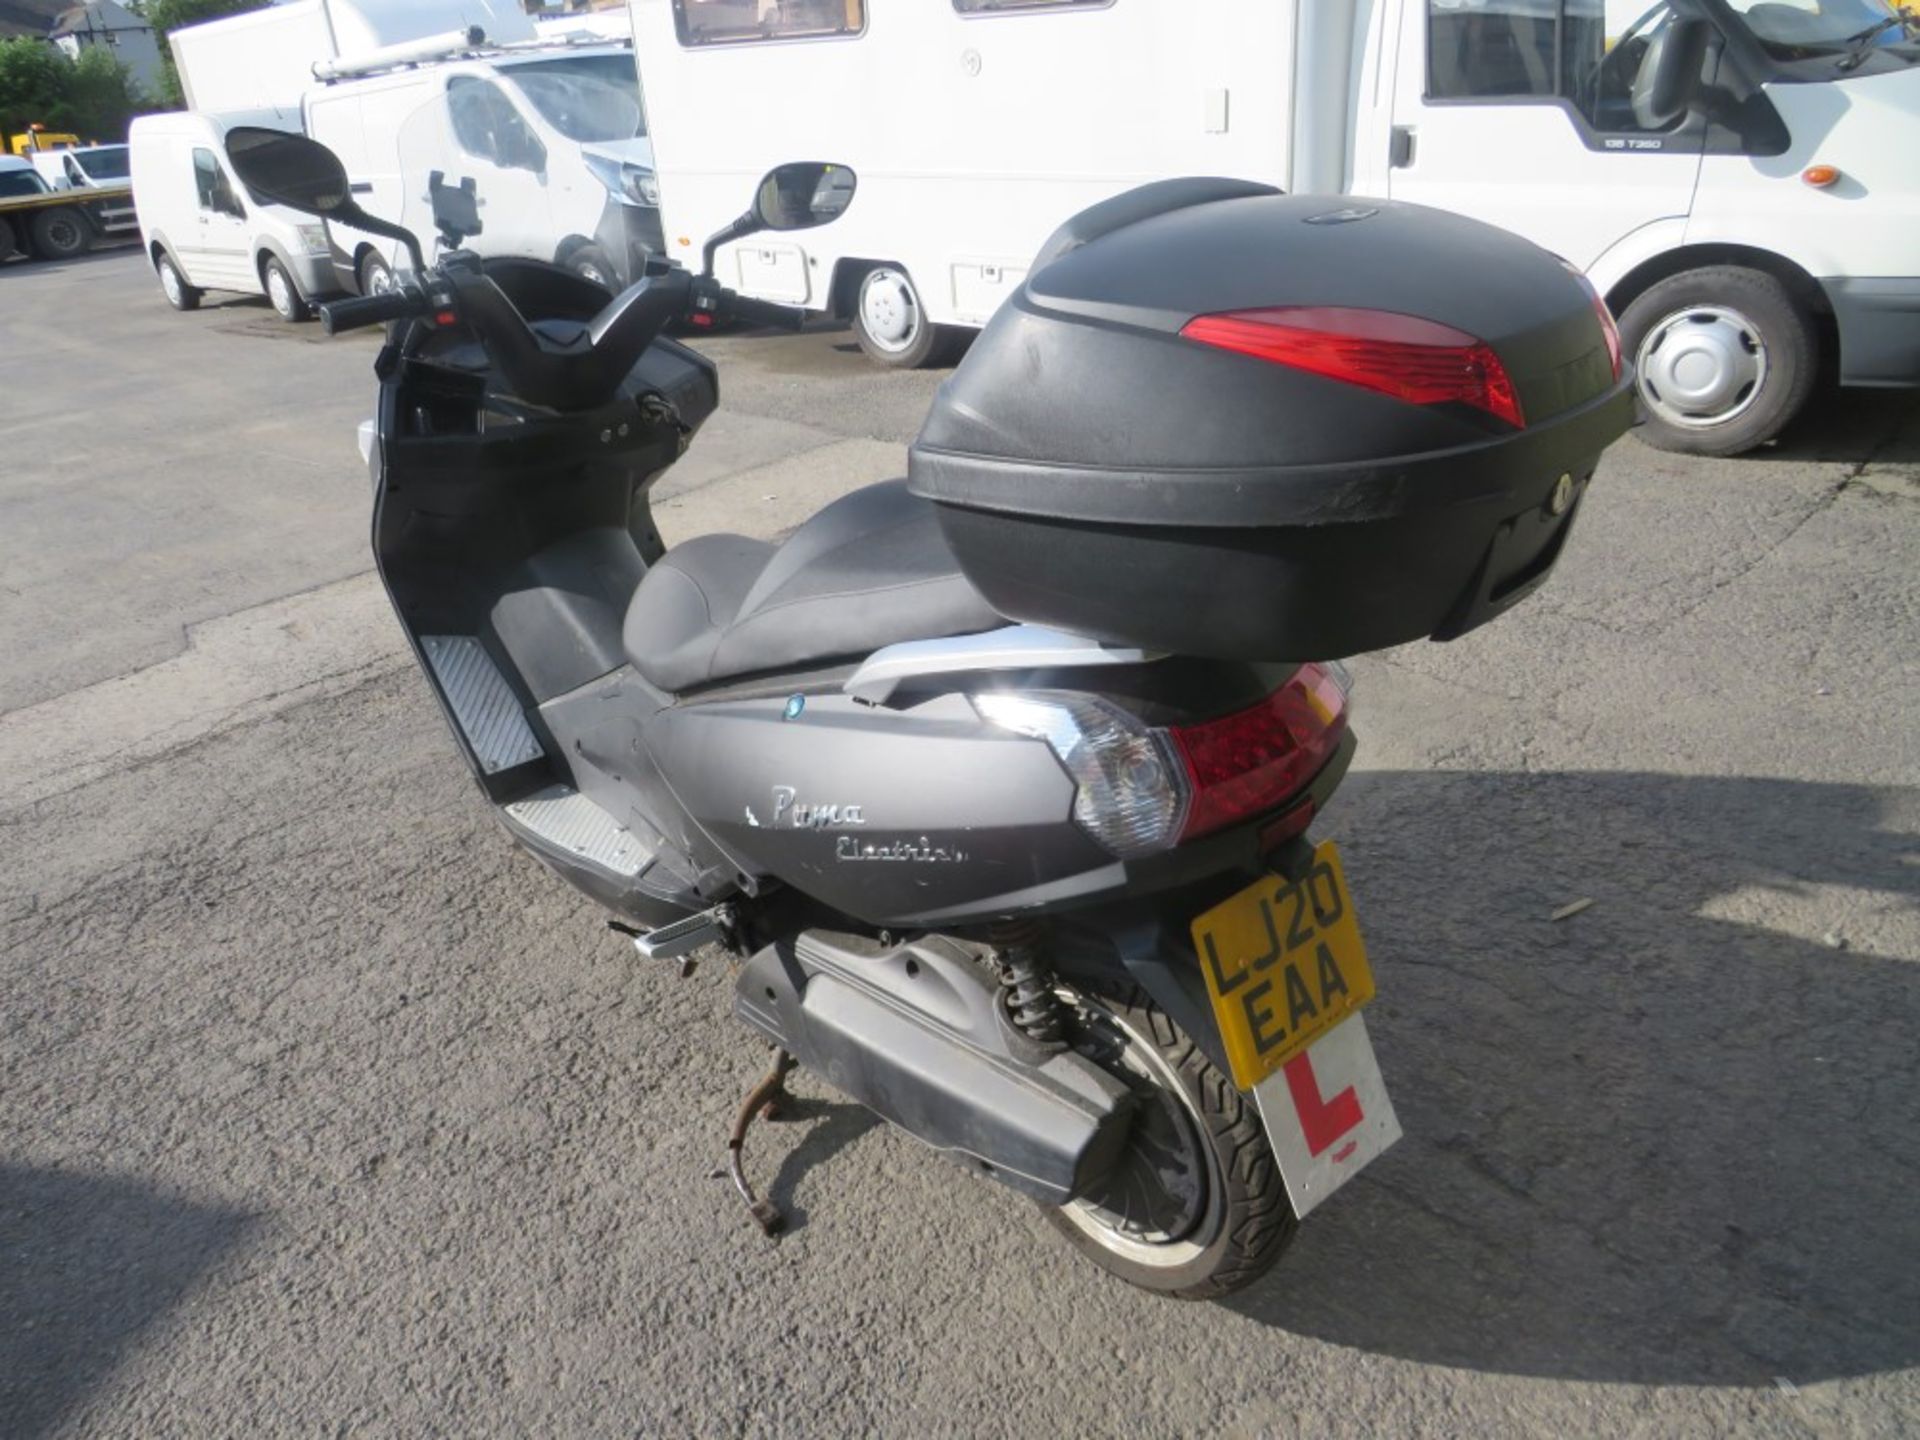 20 reg EFUN PUMA ELECTRIC SCOOTER, 1ST REG 07/20, 4247M, V5 HERE, 1 OWNER FROM NEW [NO VAT] - Image 3 of 5